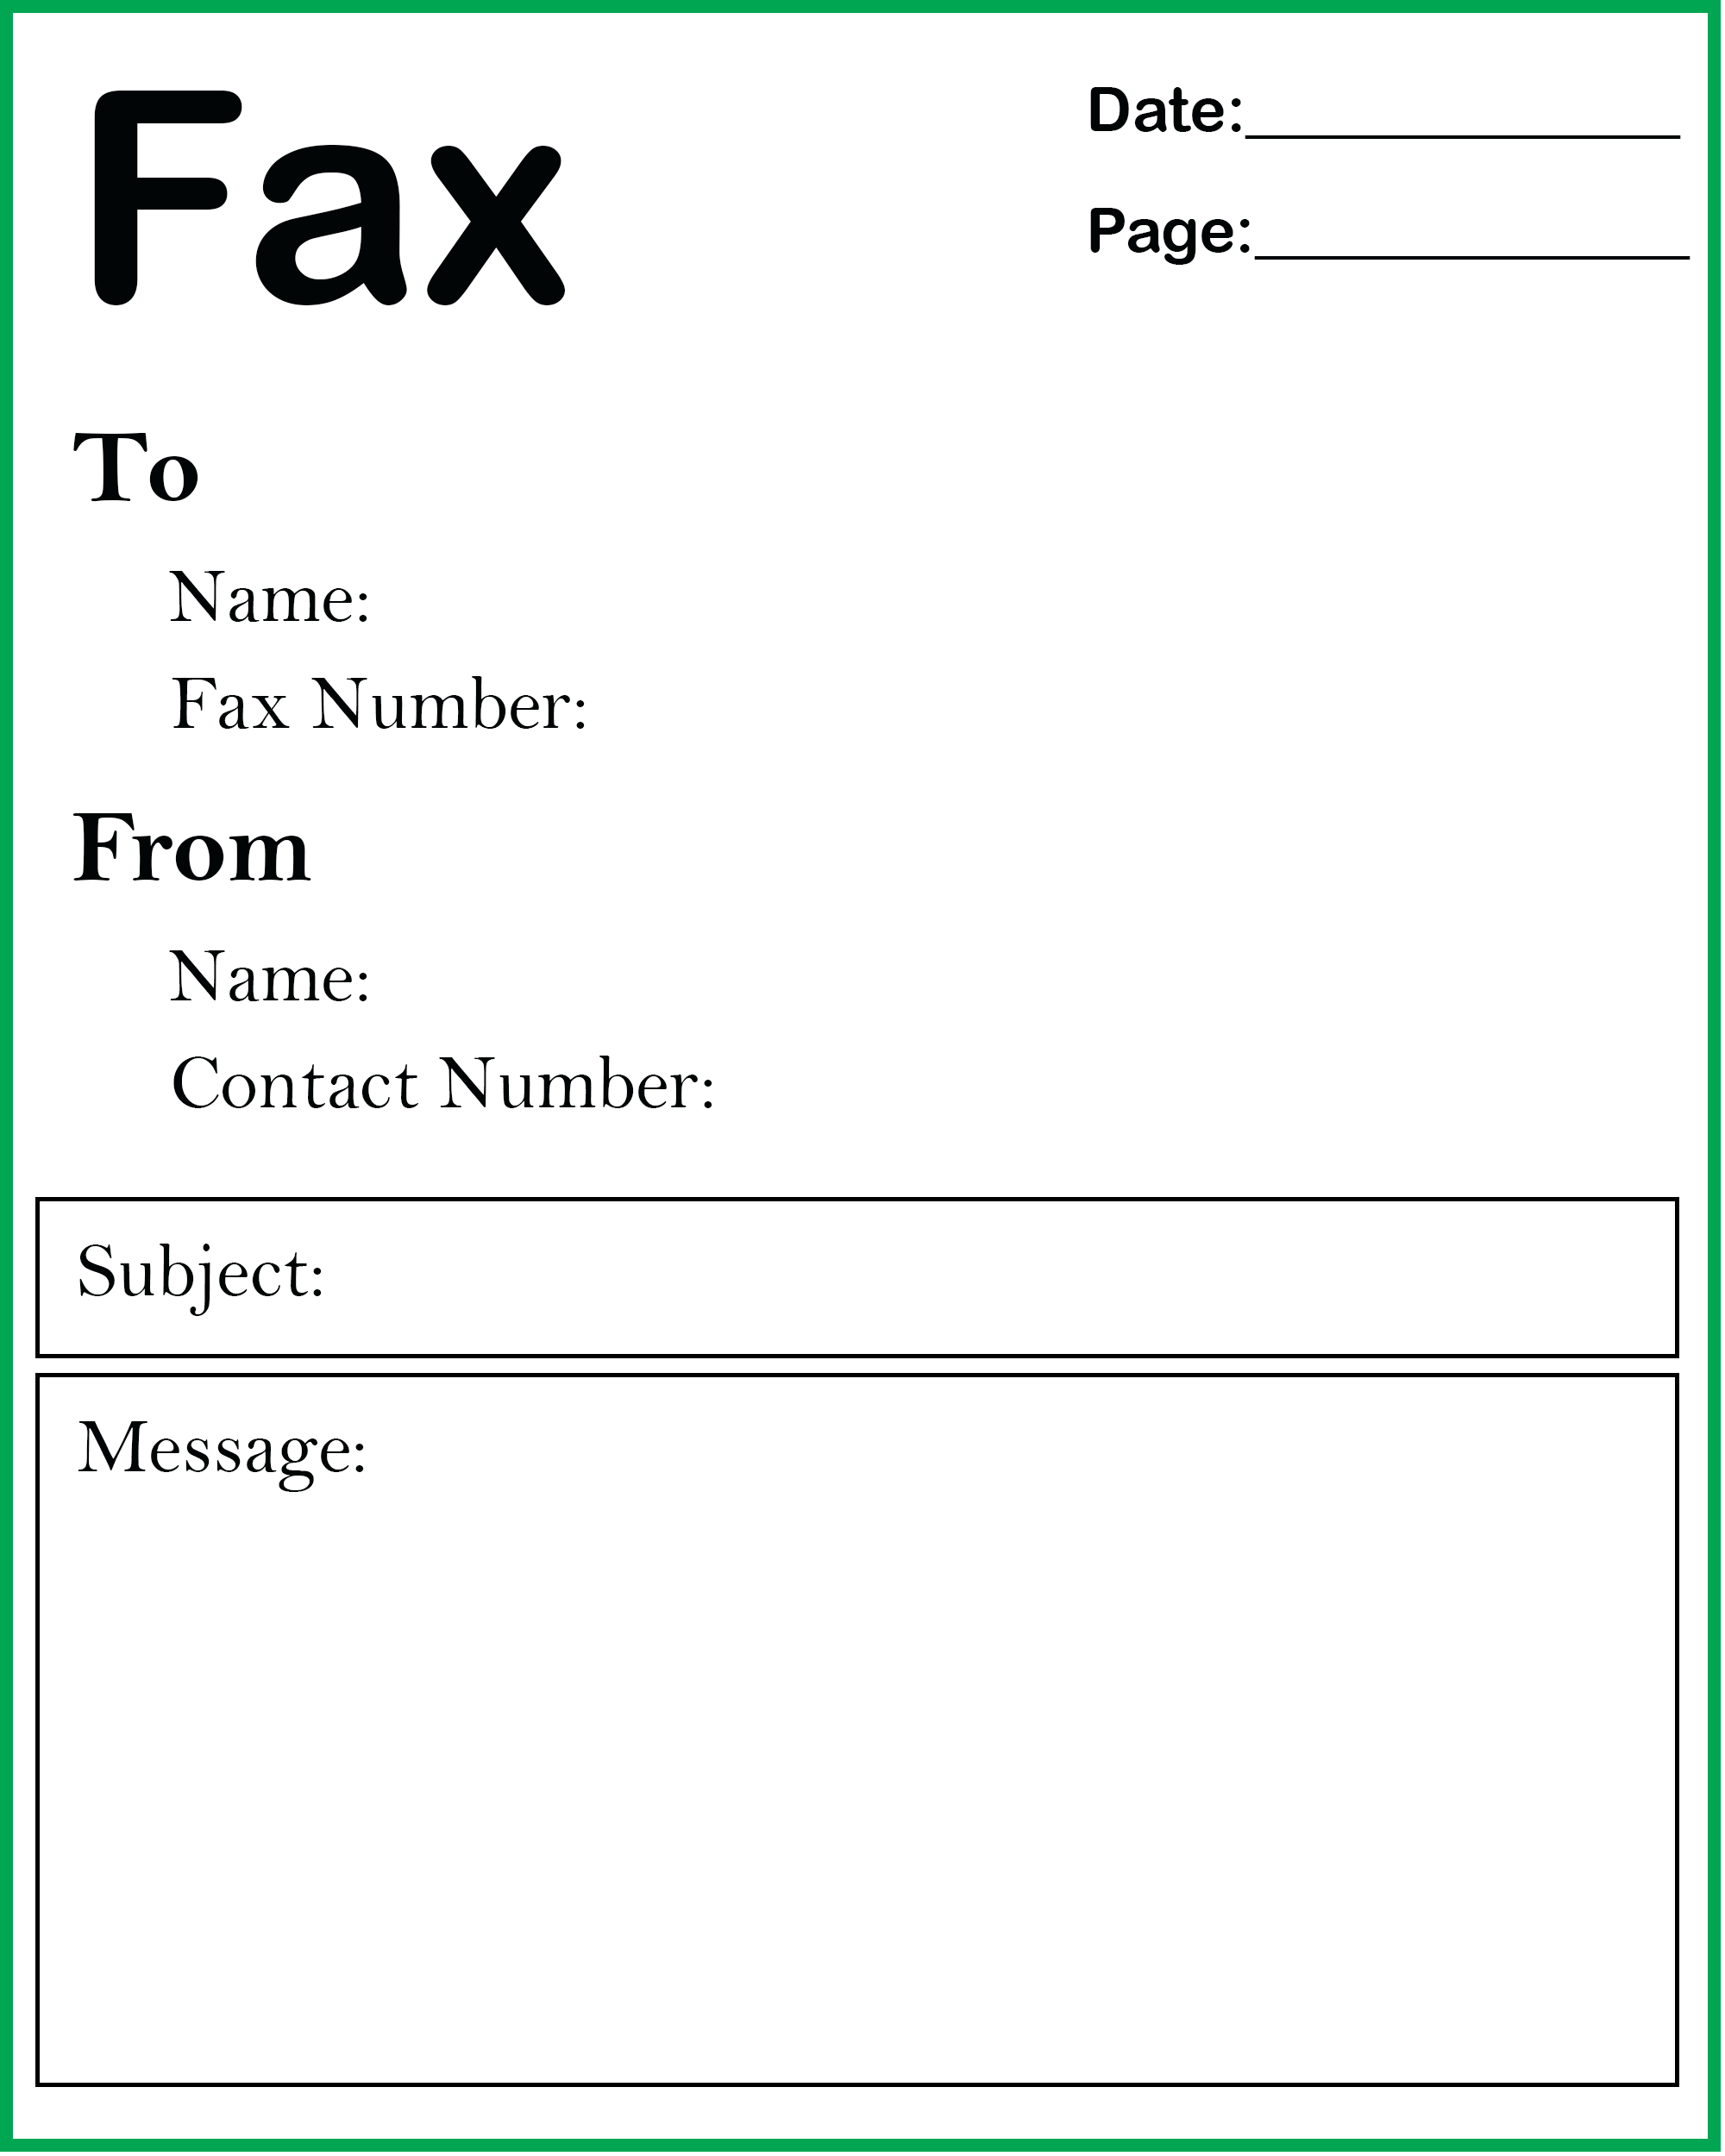 How To Use Online Fax Cover Sheet In Google Docs HowToWiki